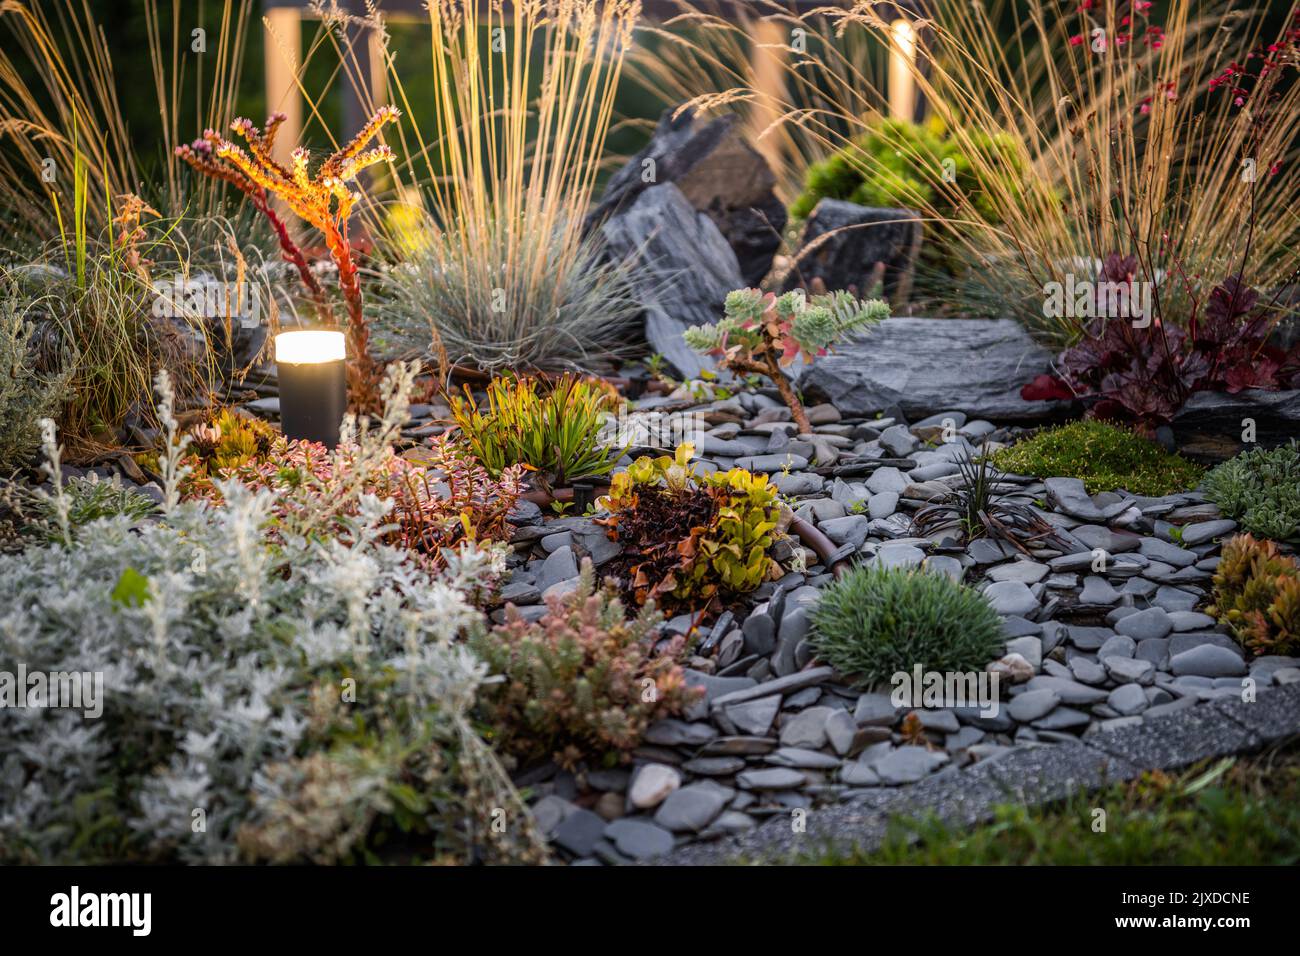 Beautifully Landscaped Flowerbed in Backyard Garden Decorated with Different Plants, Dark Pebbles and Outdoor Bollard Lighting Lamp. Landscaping Desig Stock Photo